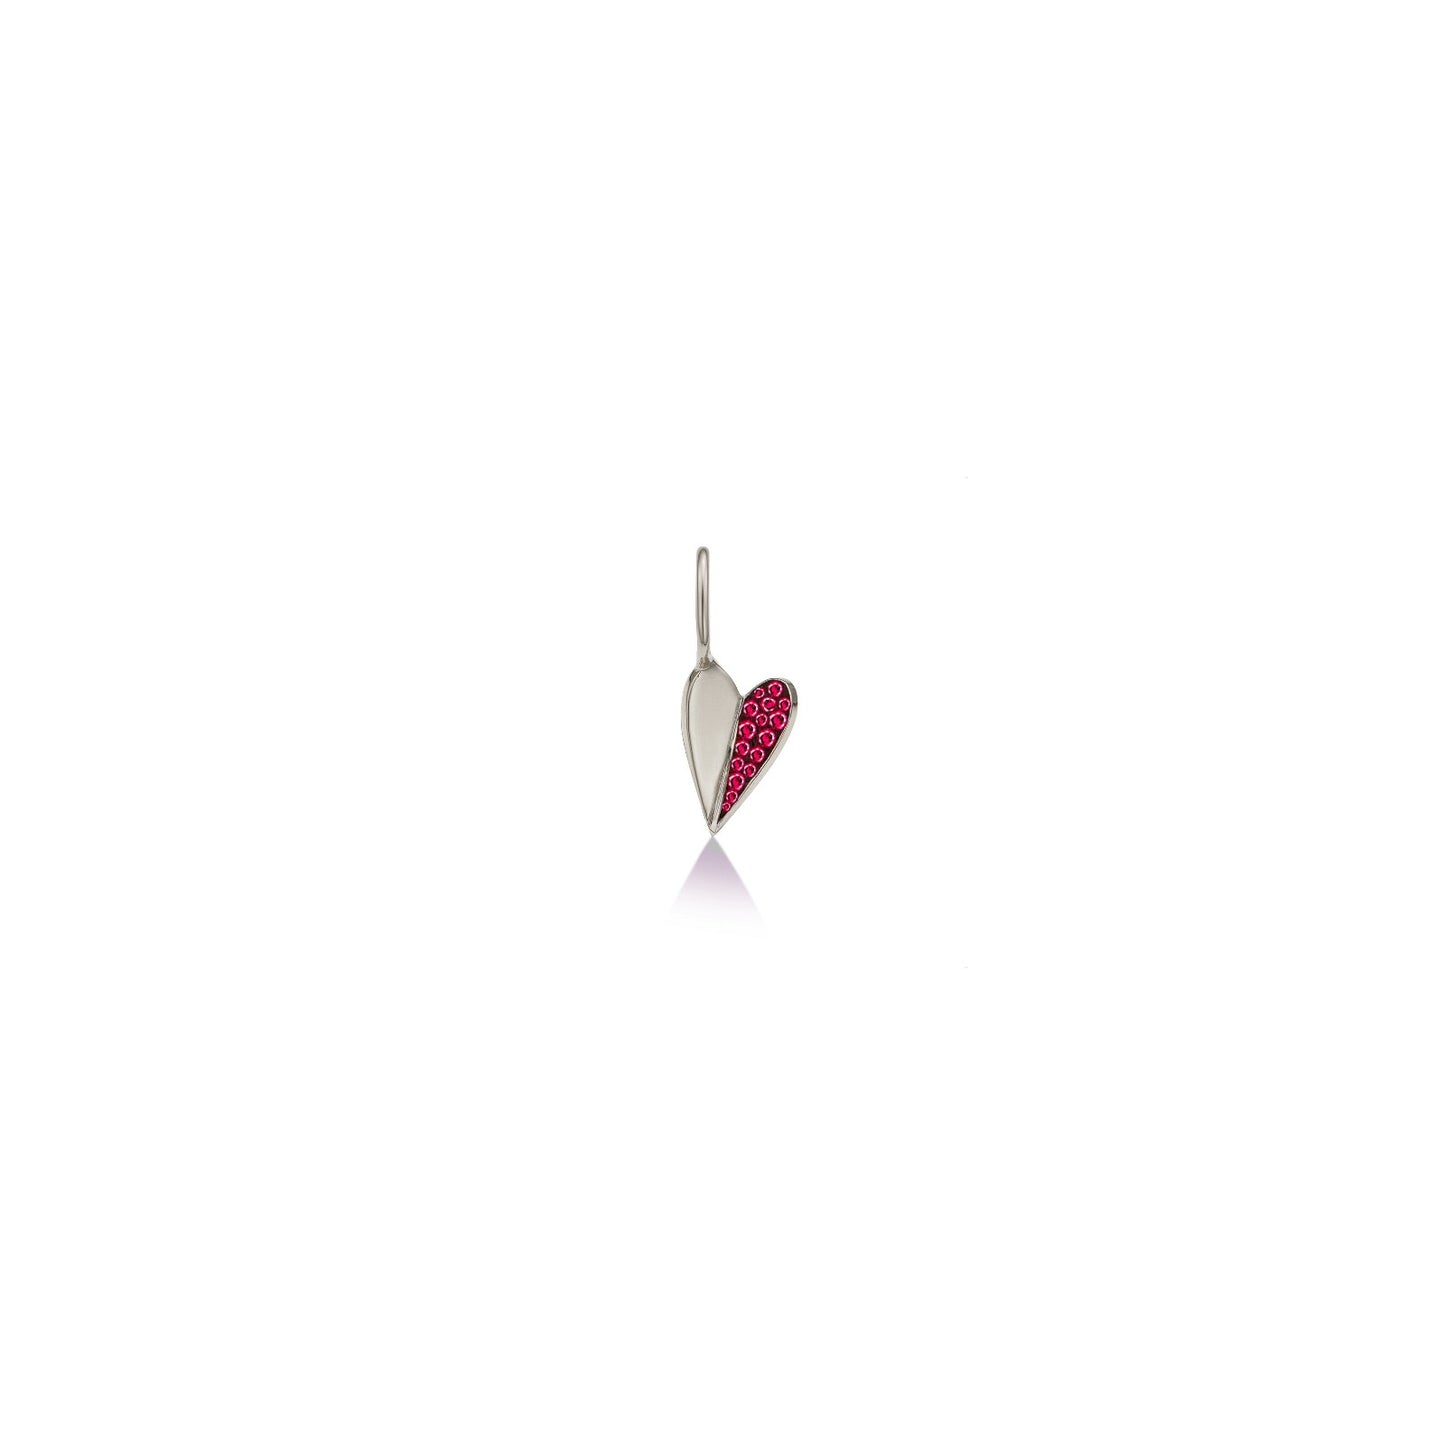 14k white gold small folded heart charm with pave red ruby stones on a blacked right side.